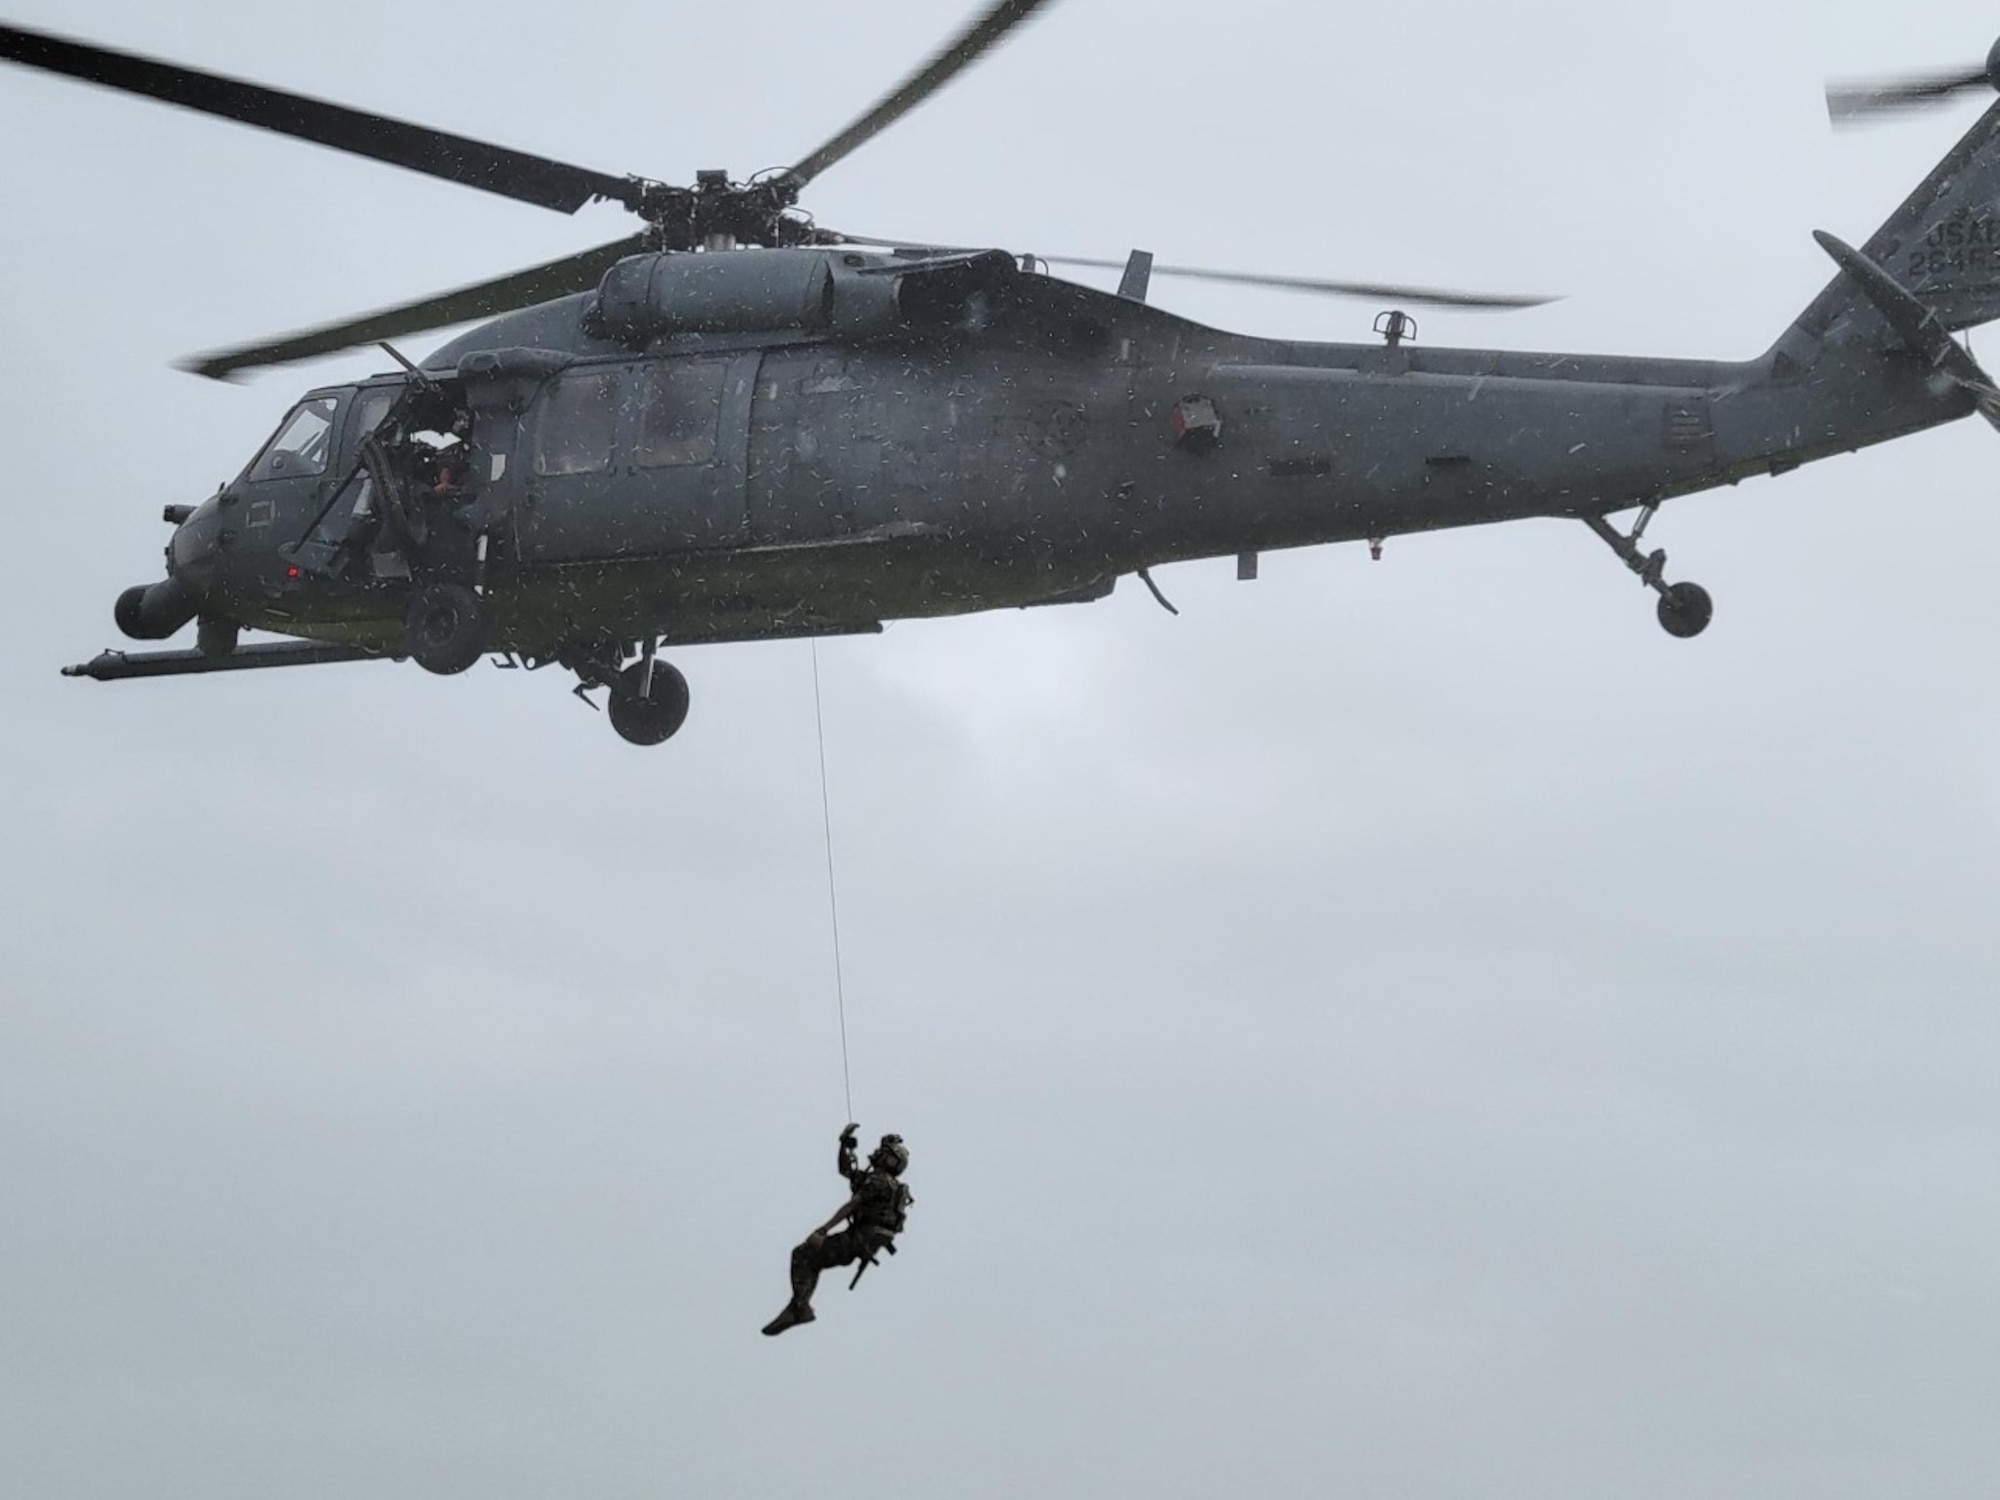 A person rappelling from a helicopter.